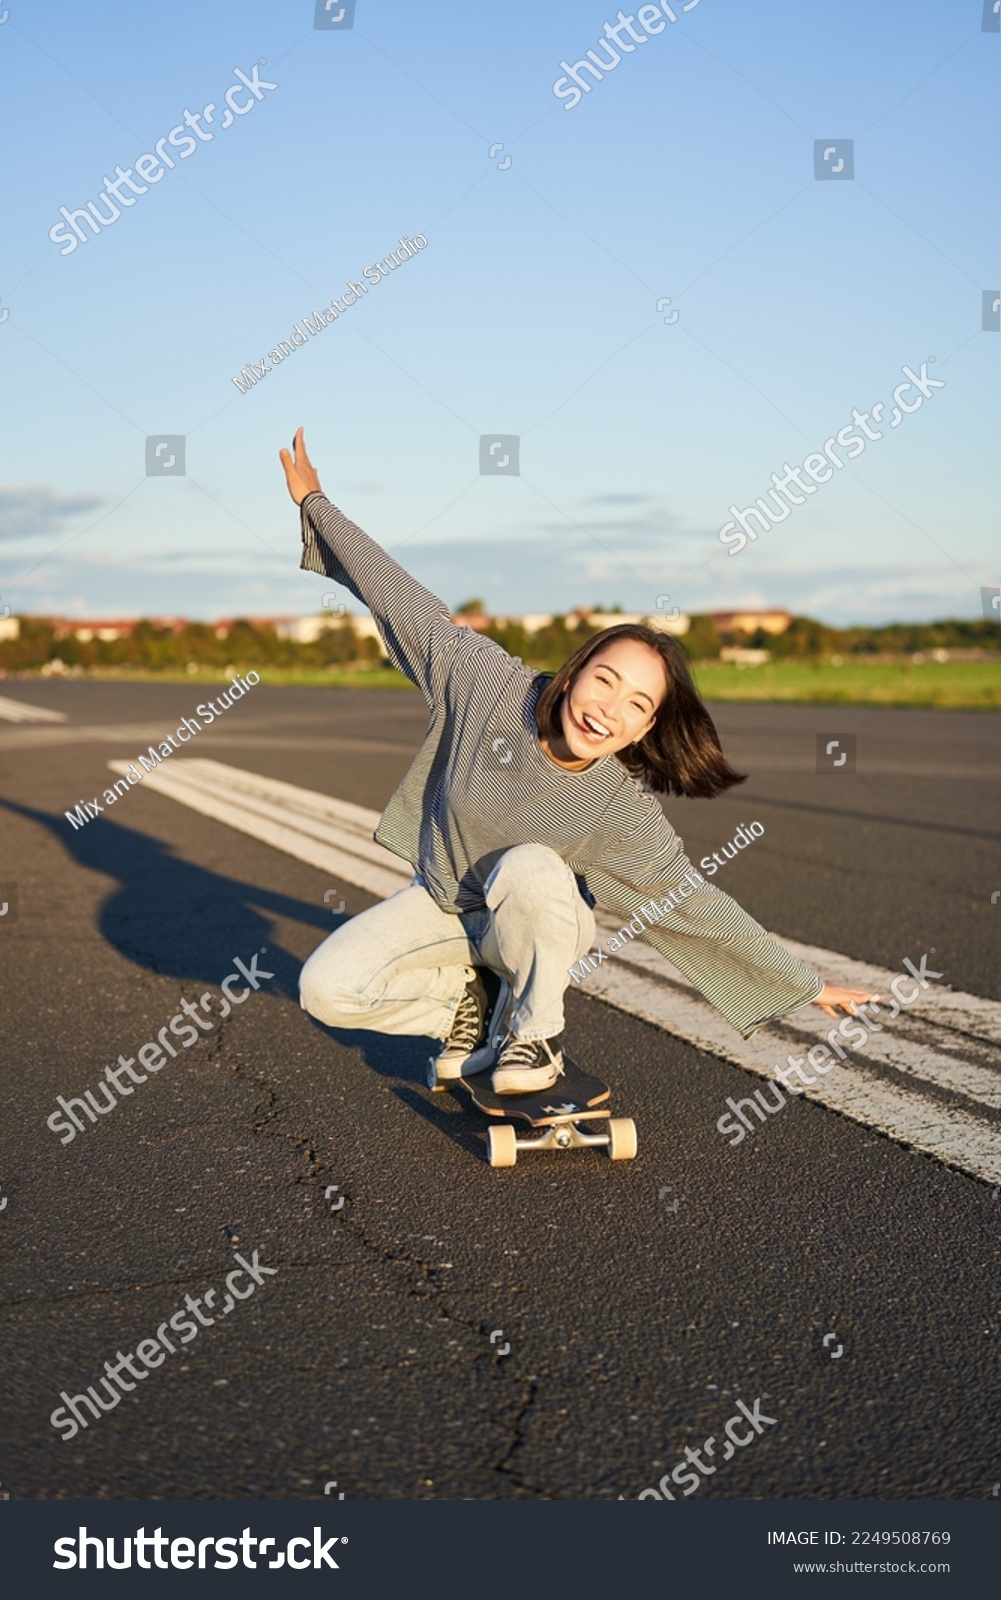 Carefree skater girl on her skateboard, riding longboard on an empty road, holding hands sideways and laughing. #2249508769